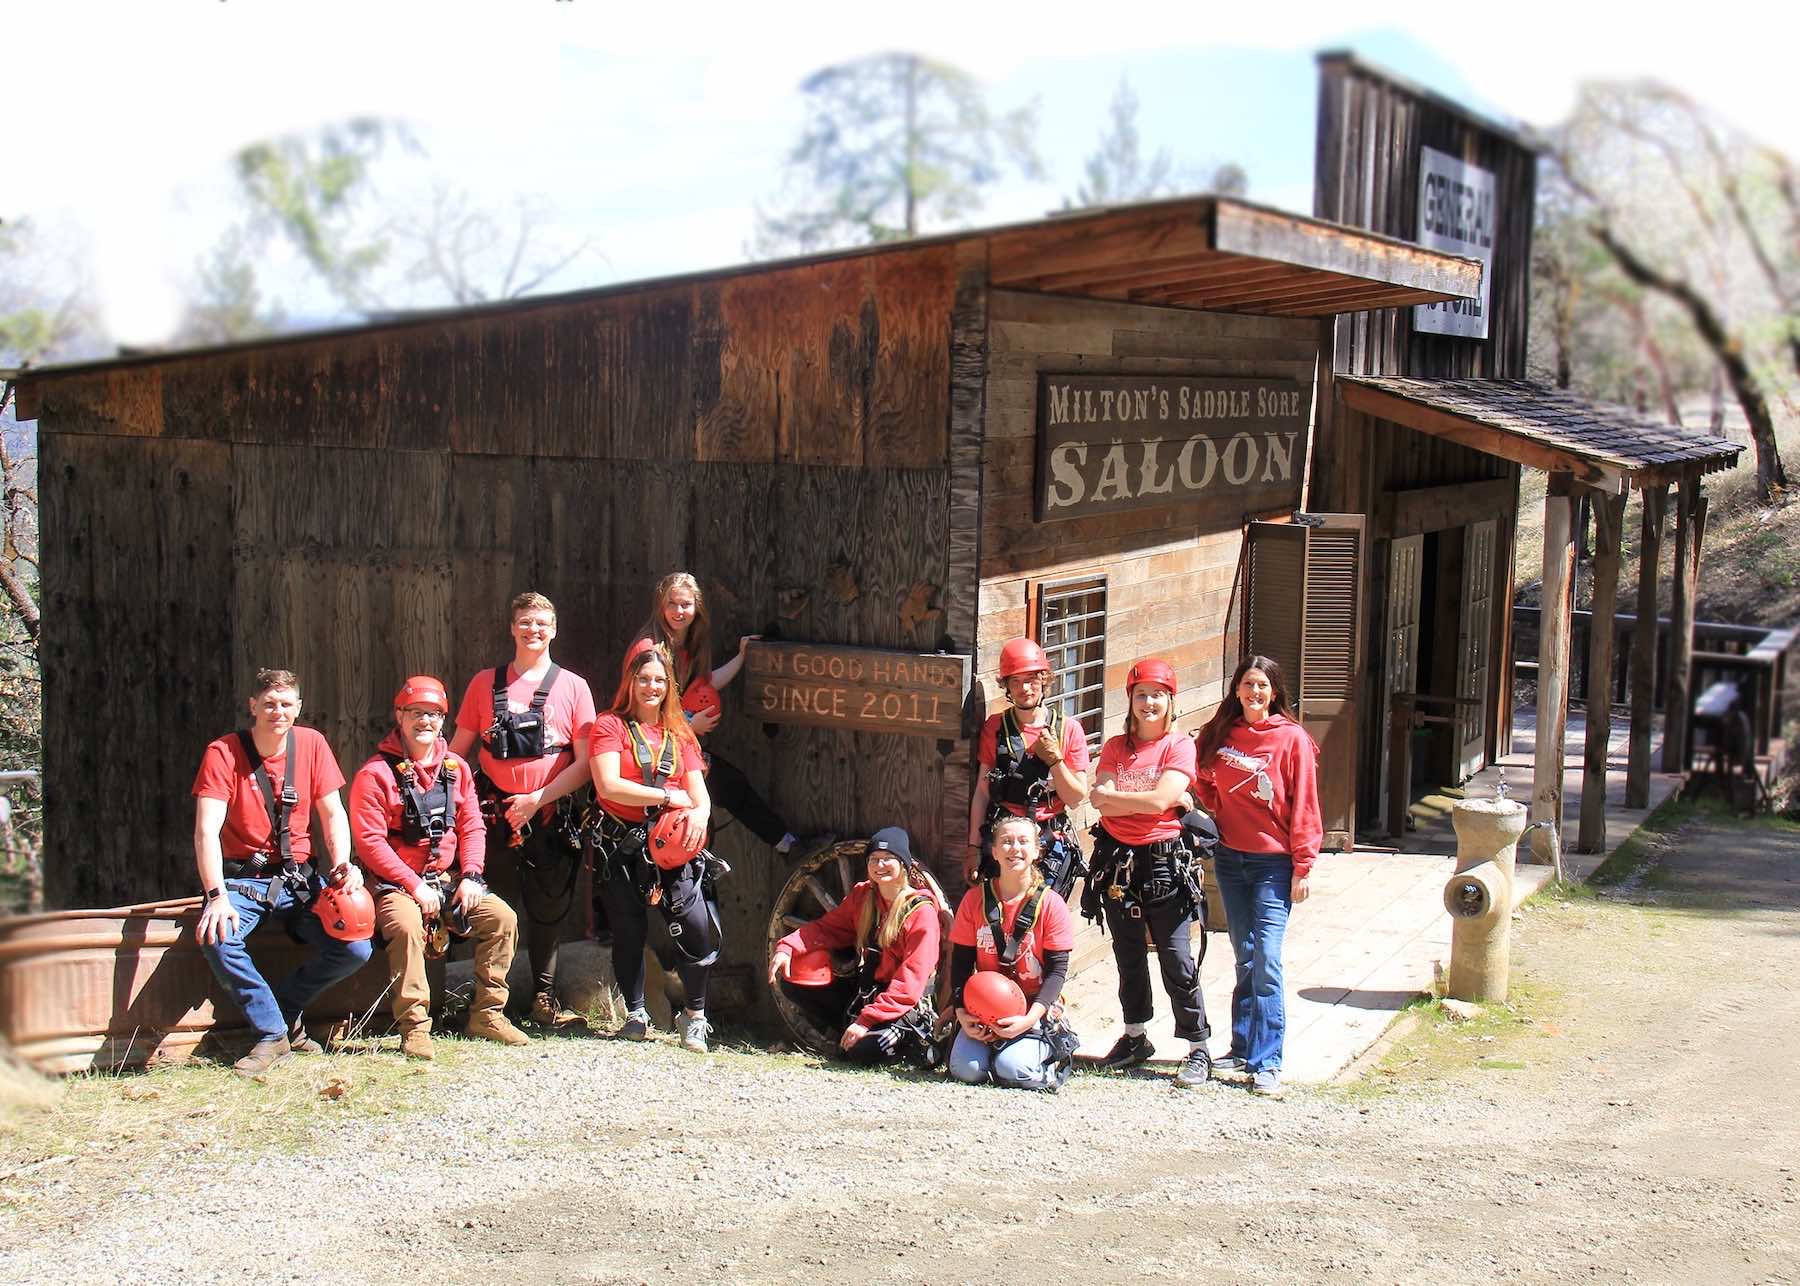 Group photo in front of a saloon